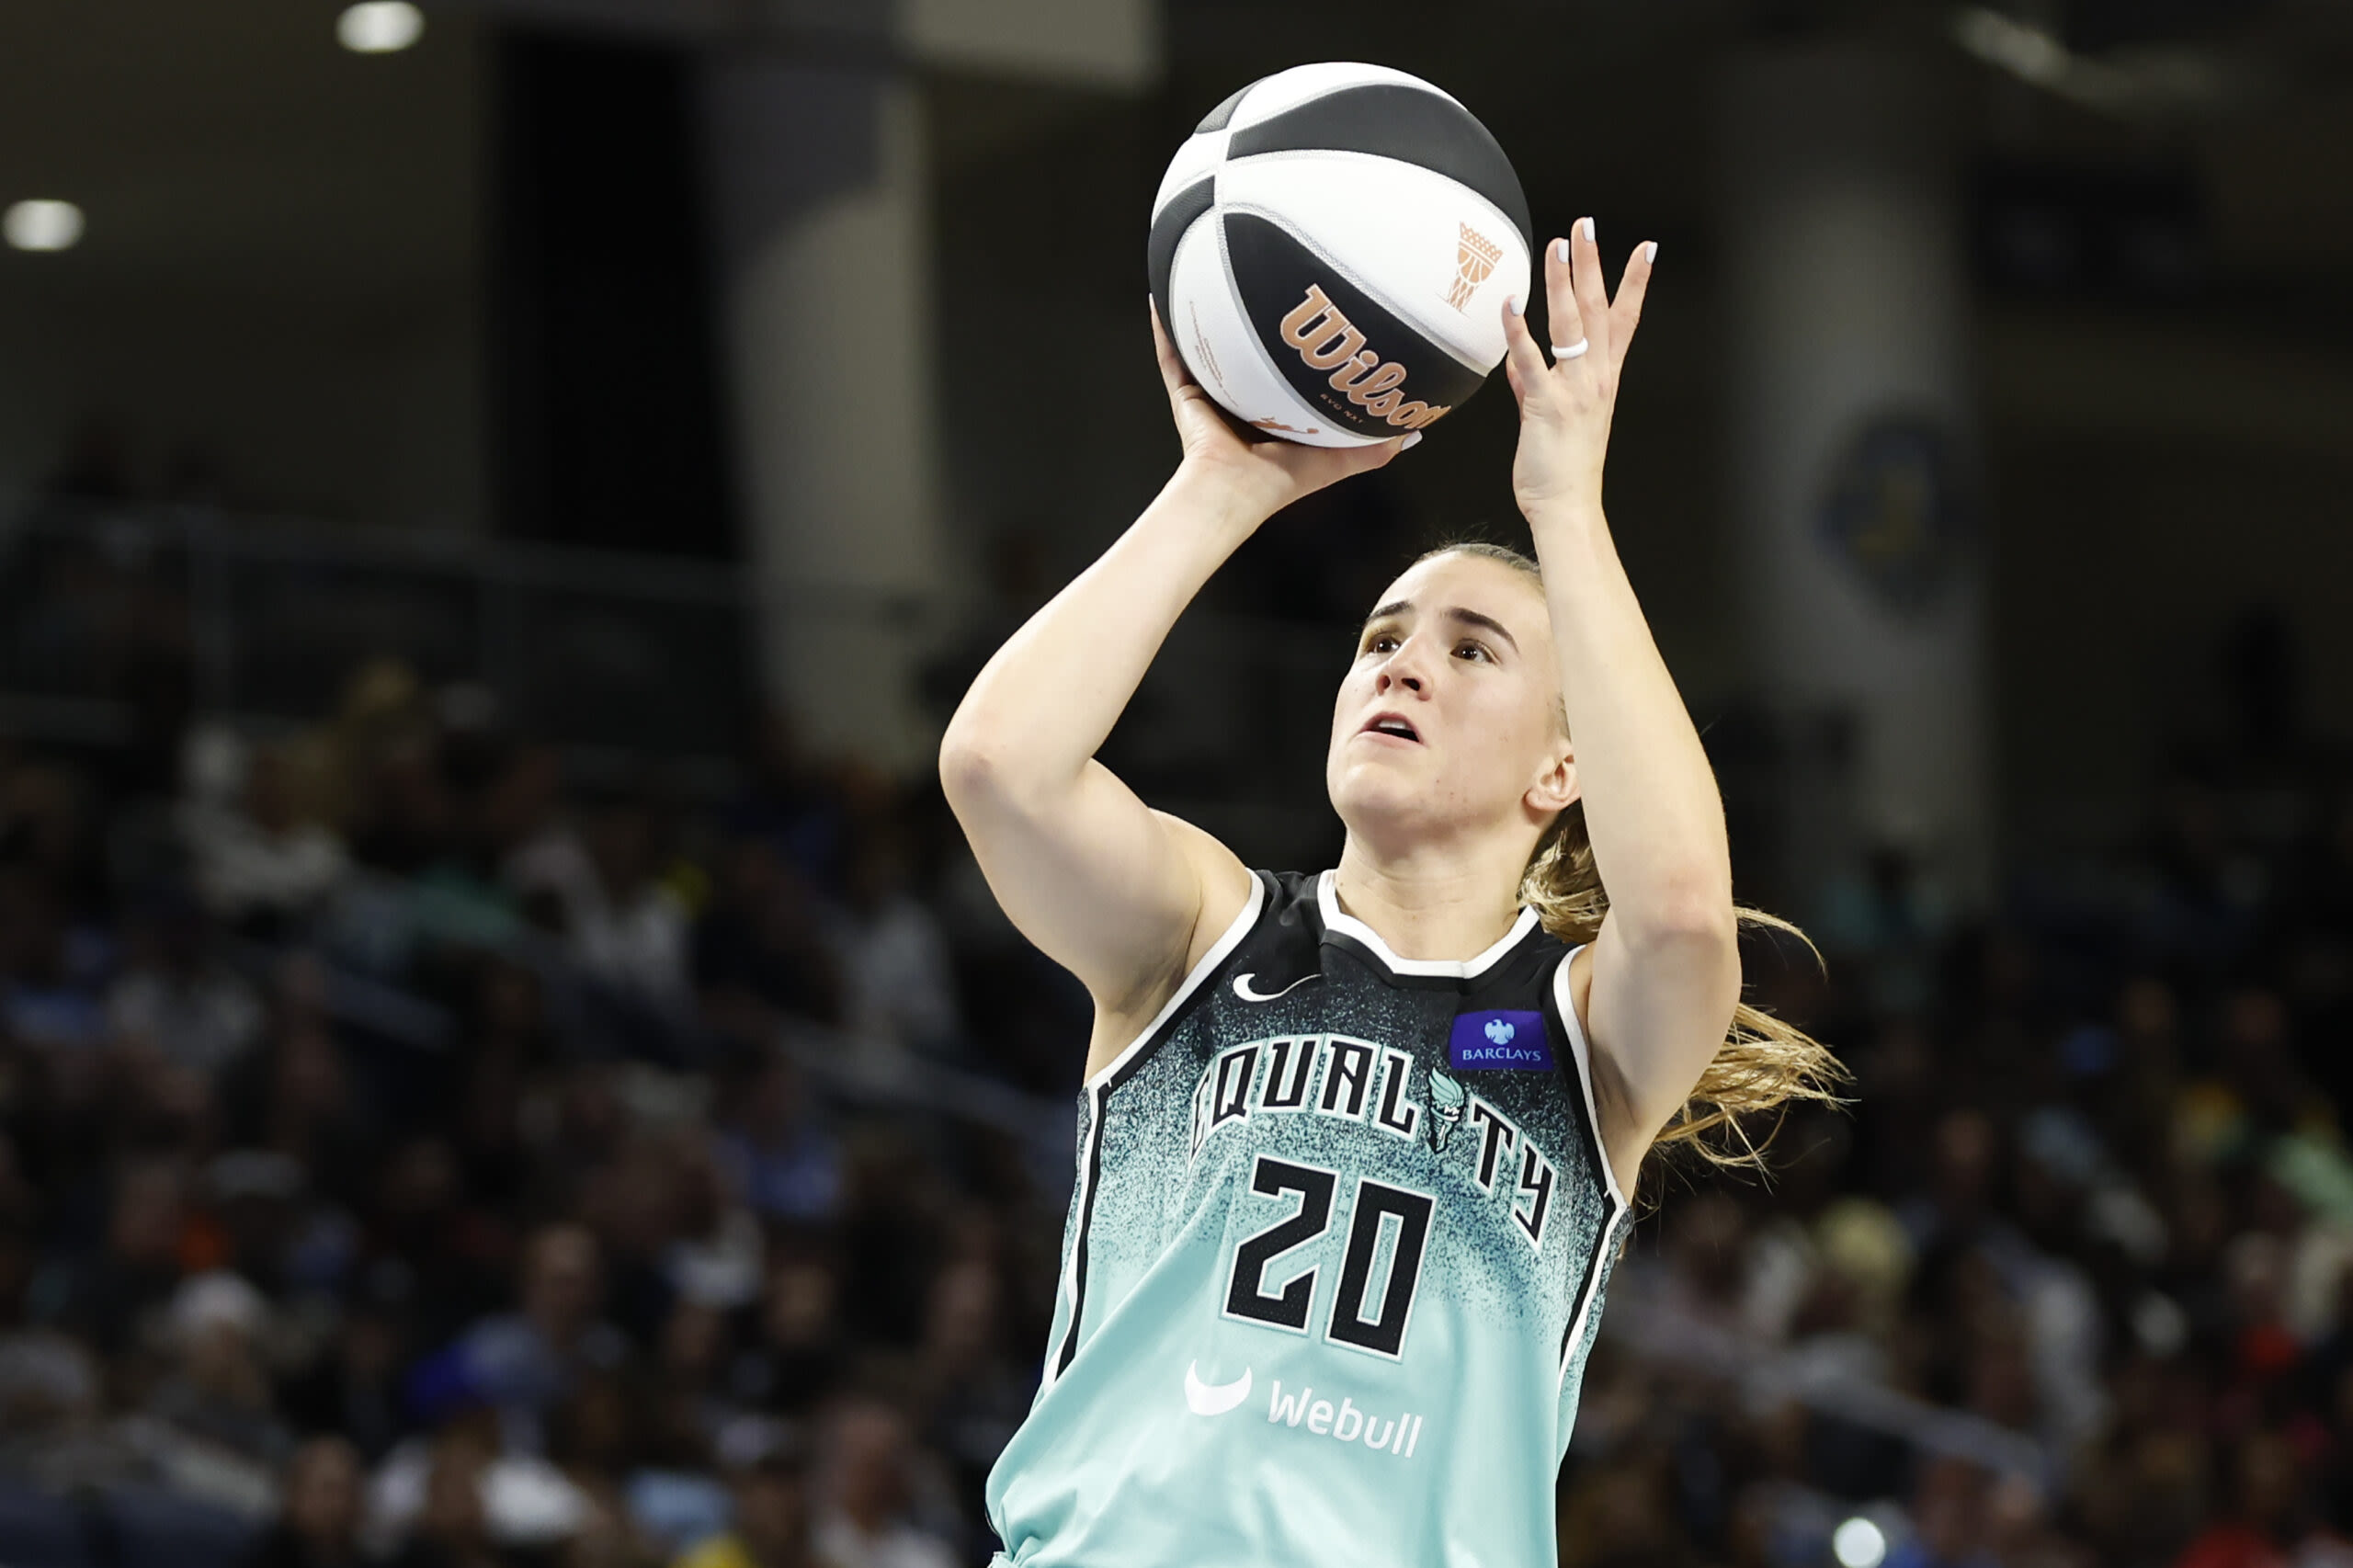 Sabrina Ionescu keeps on setting records in The Big Apple